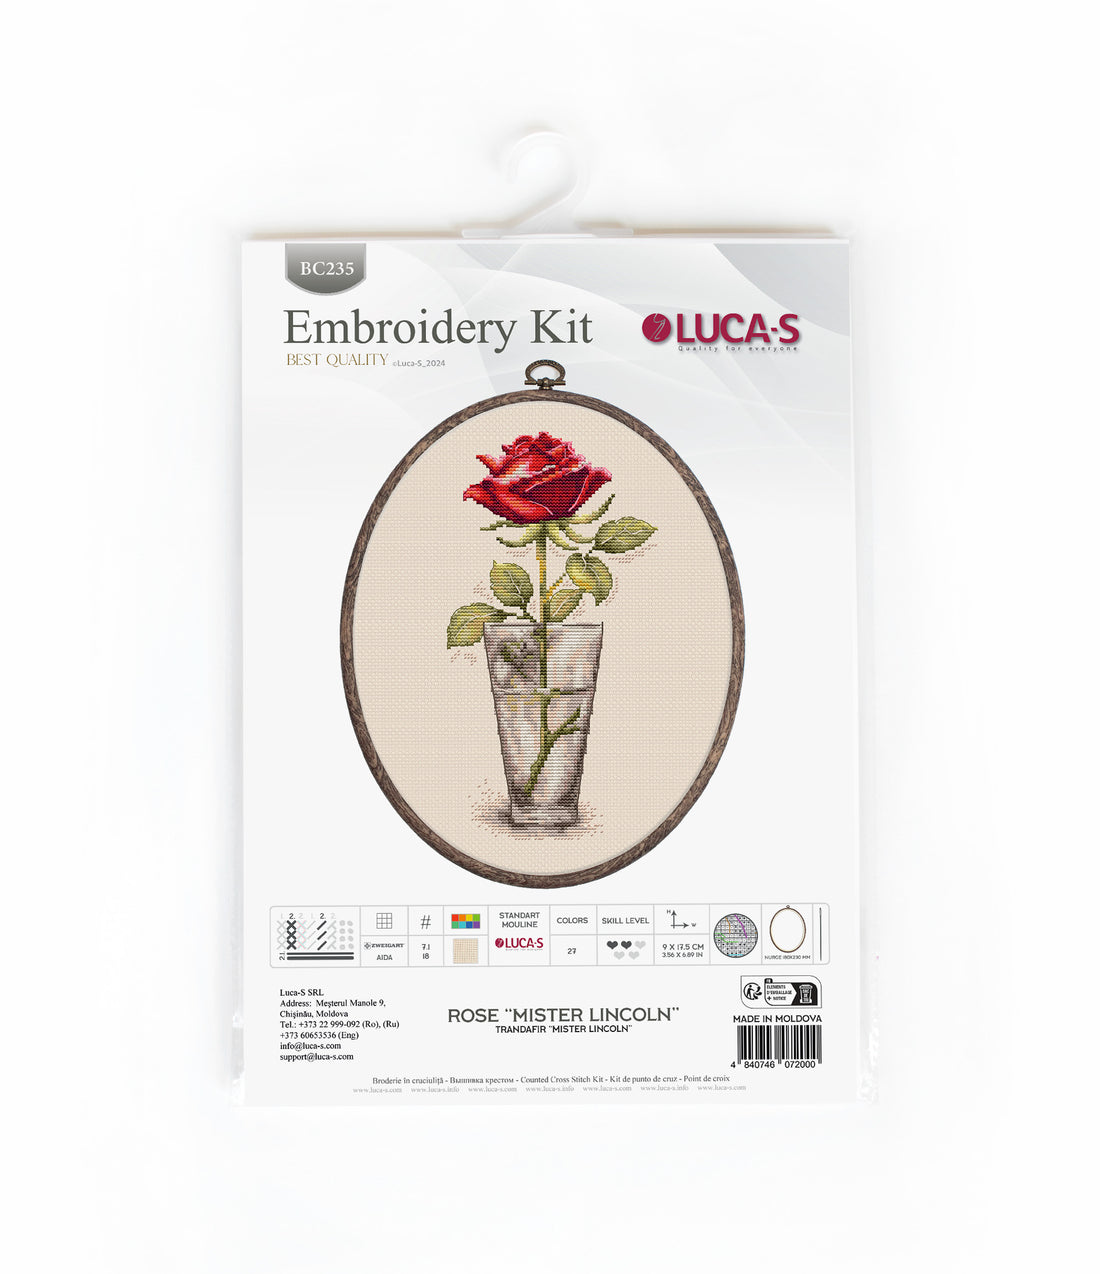 Cross Stitch Kit with Hoop Included Luca-S - Rose “Mister Lincoln”, BC235